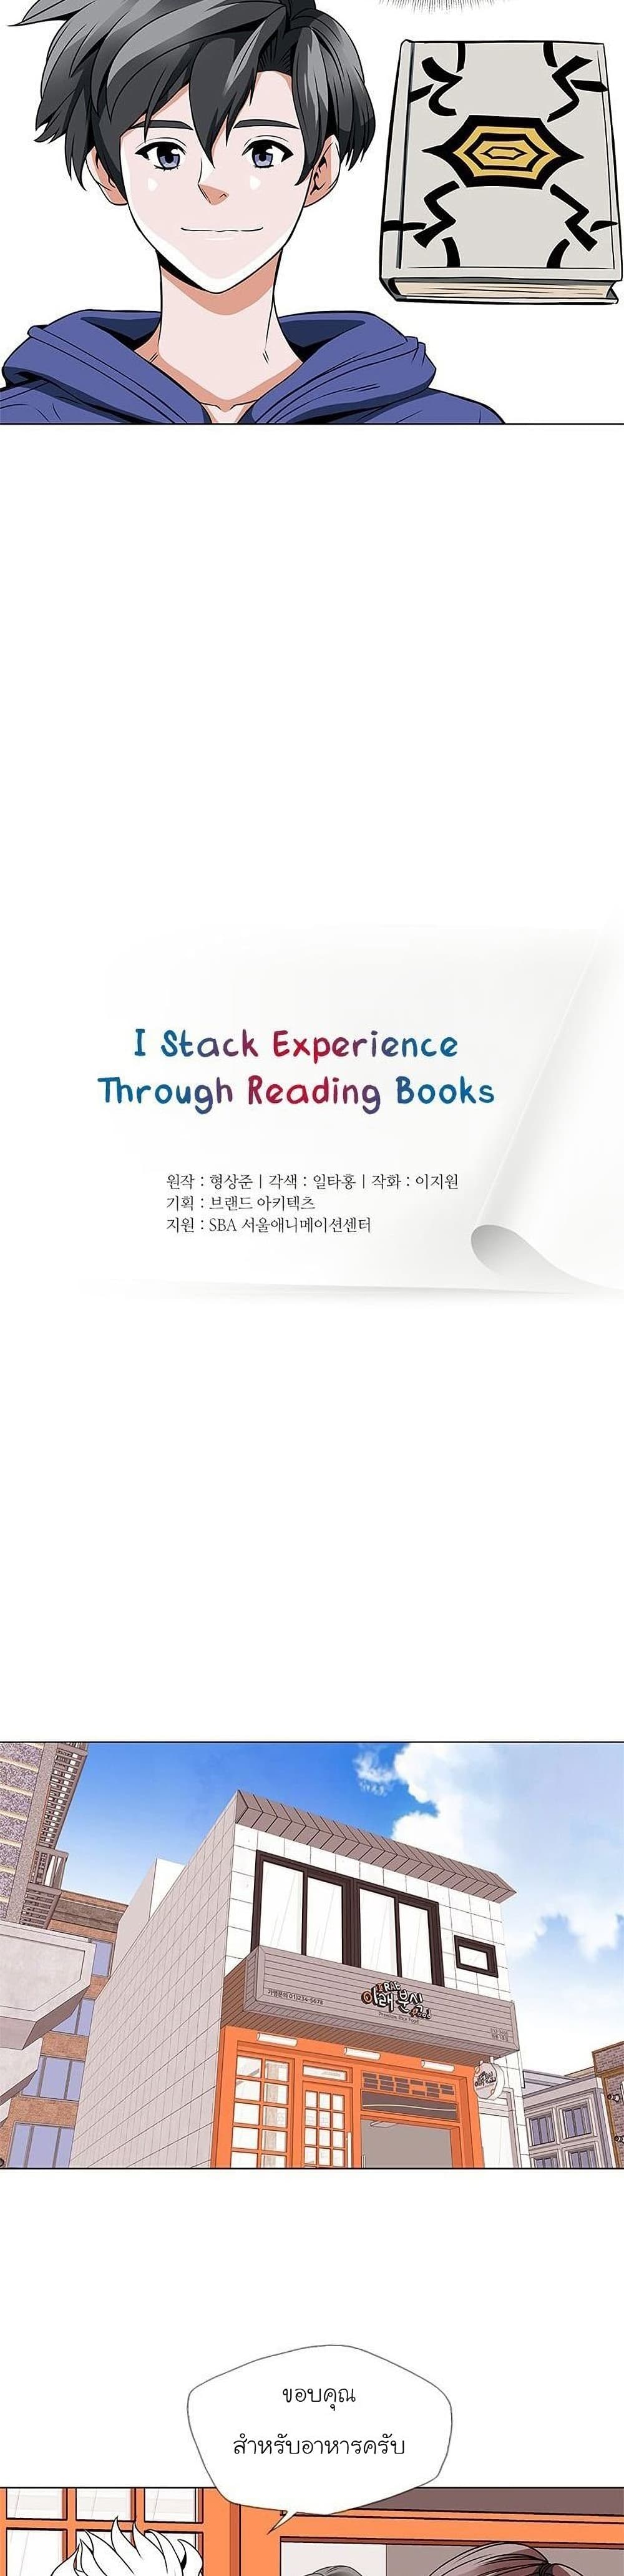 I Stack Experience Through Reading Books 25-25